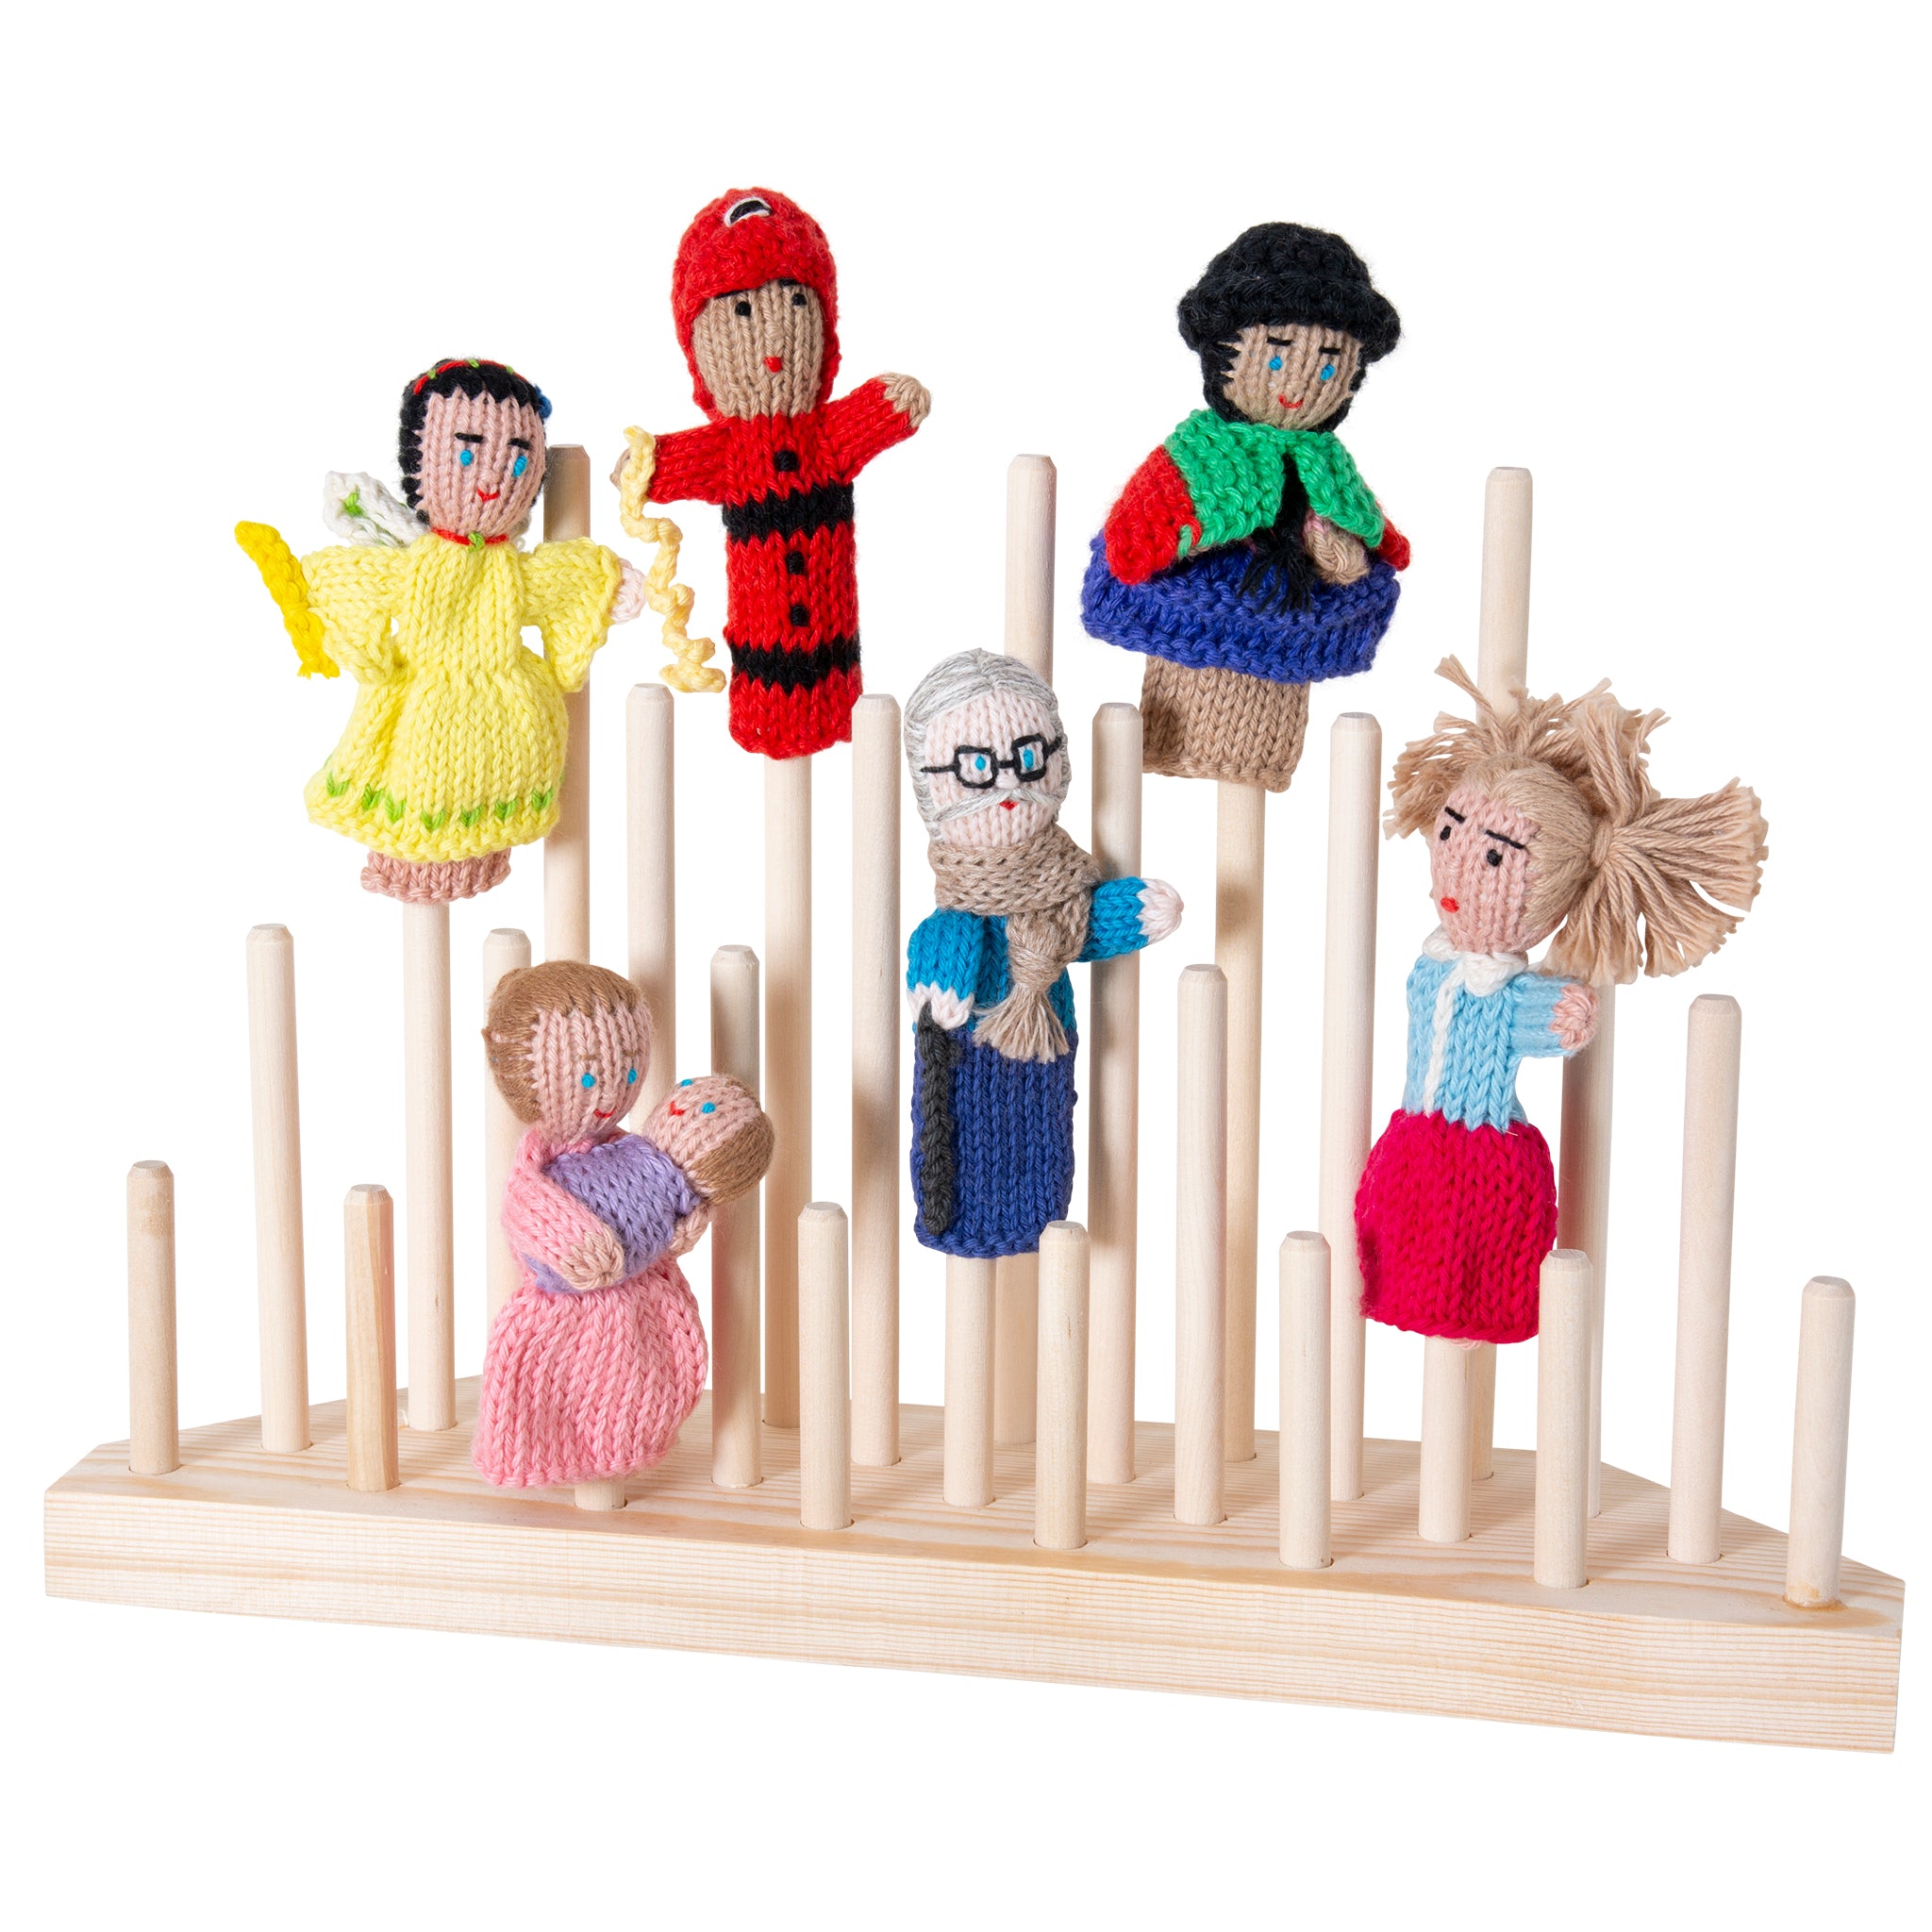 Puppet Rack (26) - Large Wooden Display